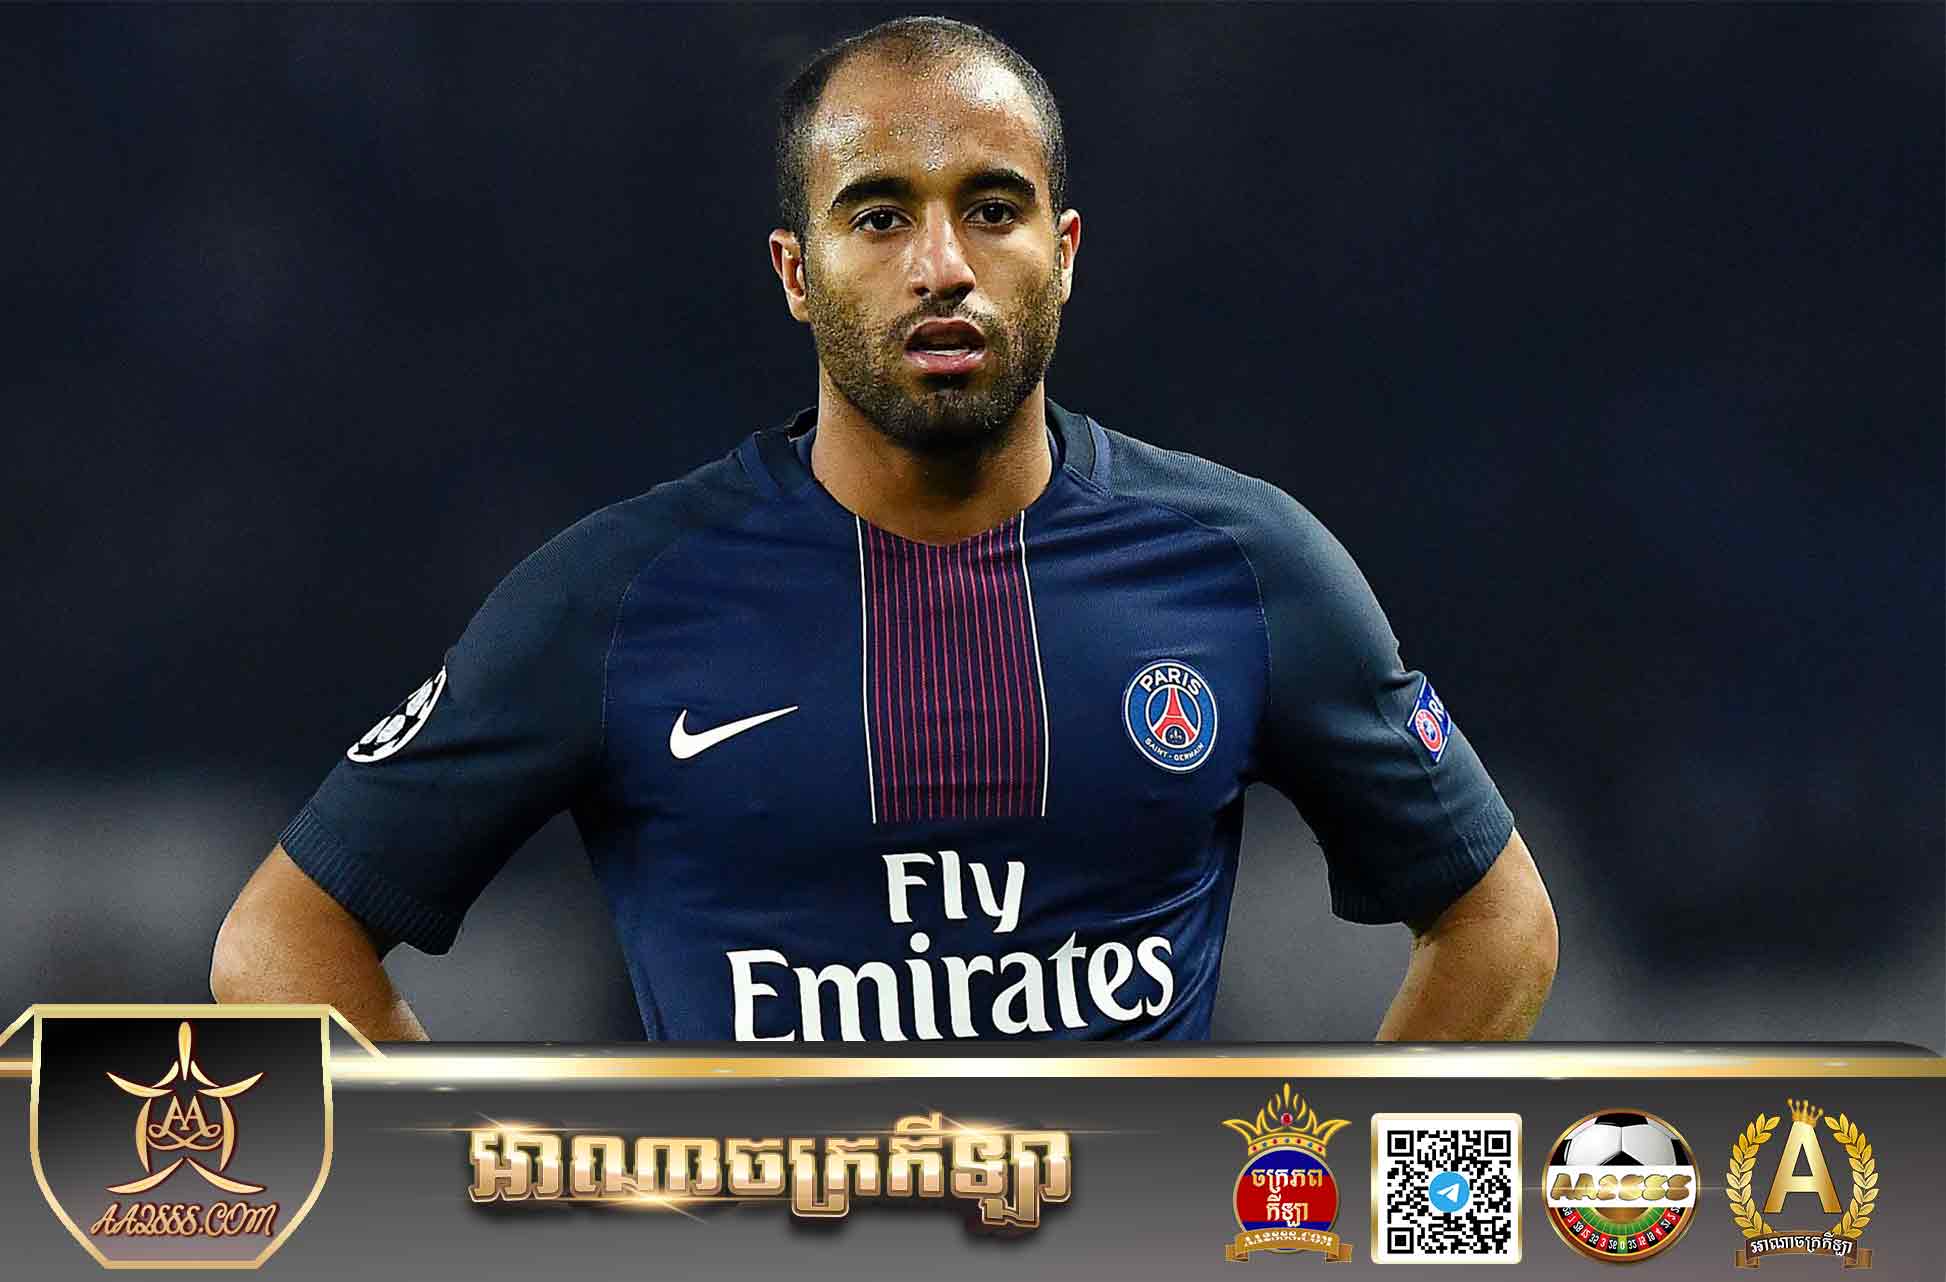 Lucas moura is likely to leave this season 